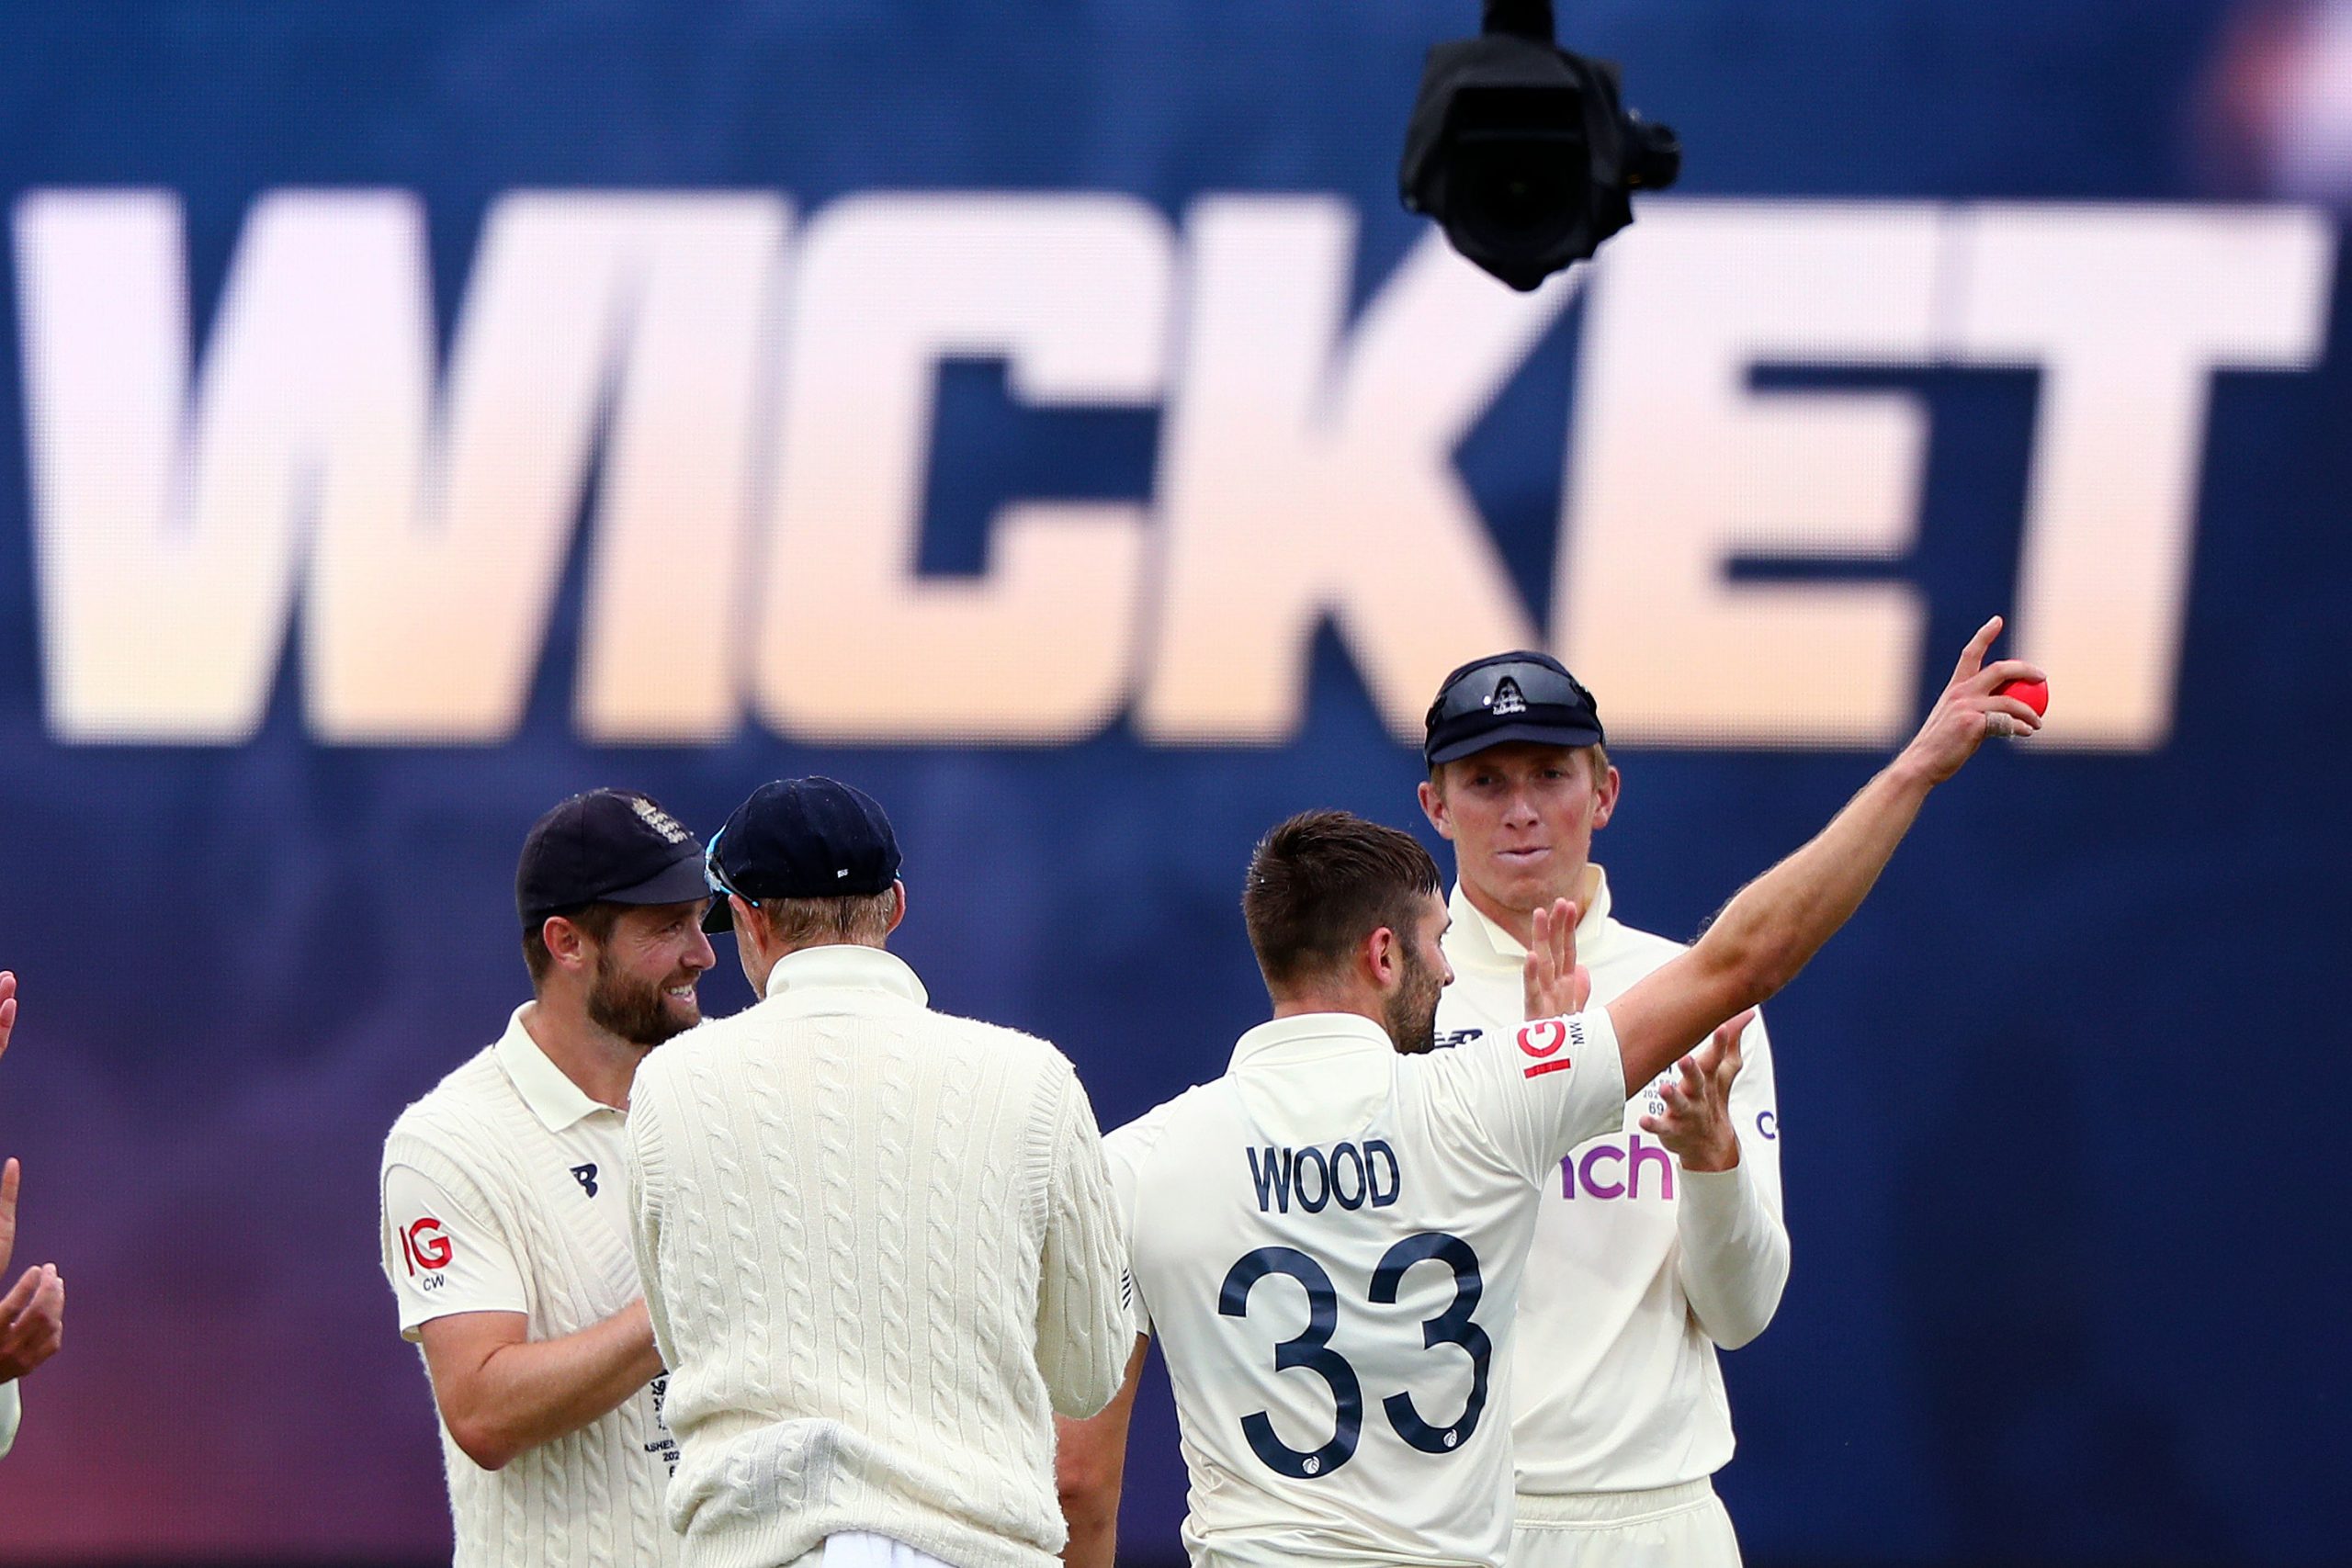 Ashes: Mark Wood pulls off a 5 wicket haul but Australia extends lead to 256